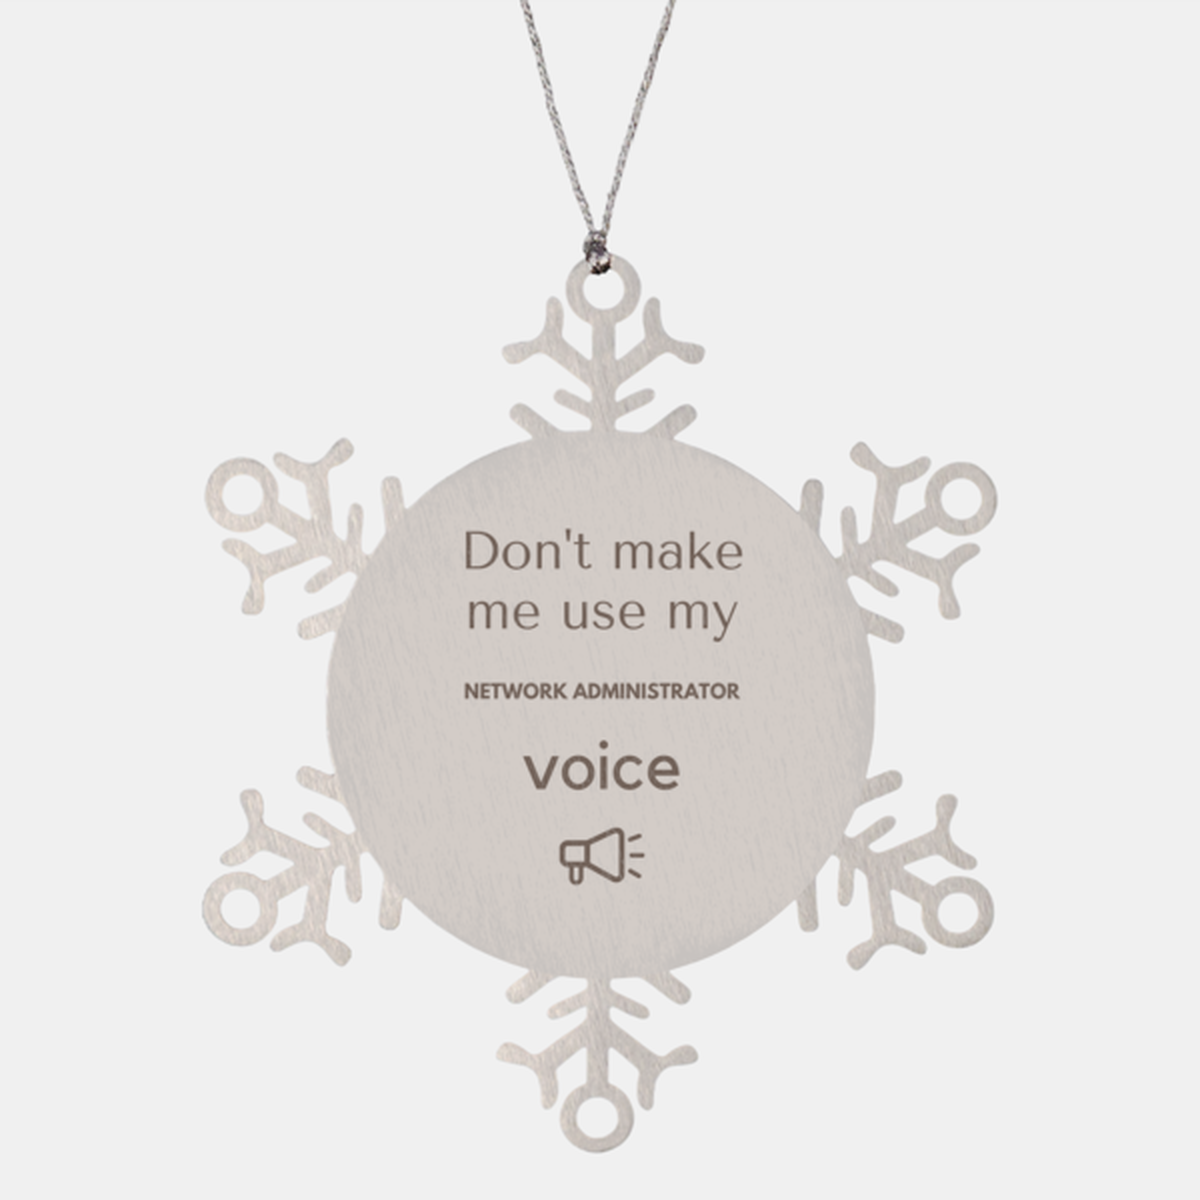 Don't make me use my Network Administrator voice, Sarcasm Network Administrator Ornament Gifts, Christmas Network Administrator Snowflake Ornament Unique Gifts For Network Administrator Coworkers, Men, Women, Colleague, Friends